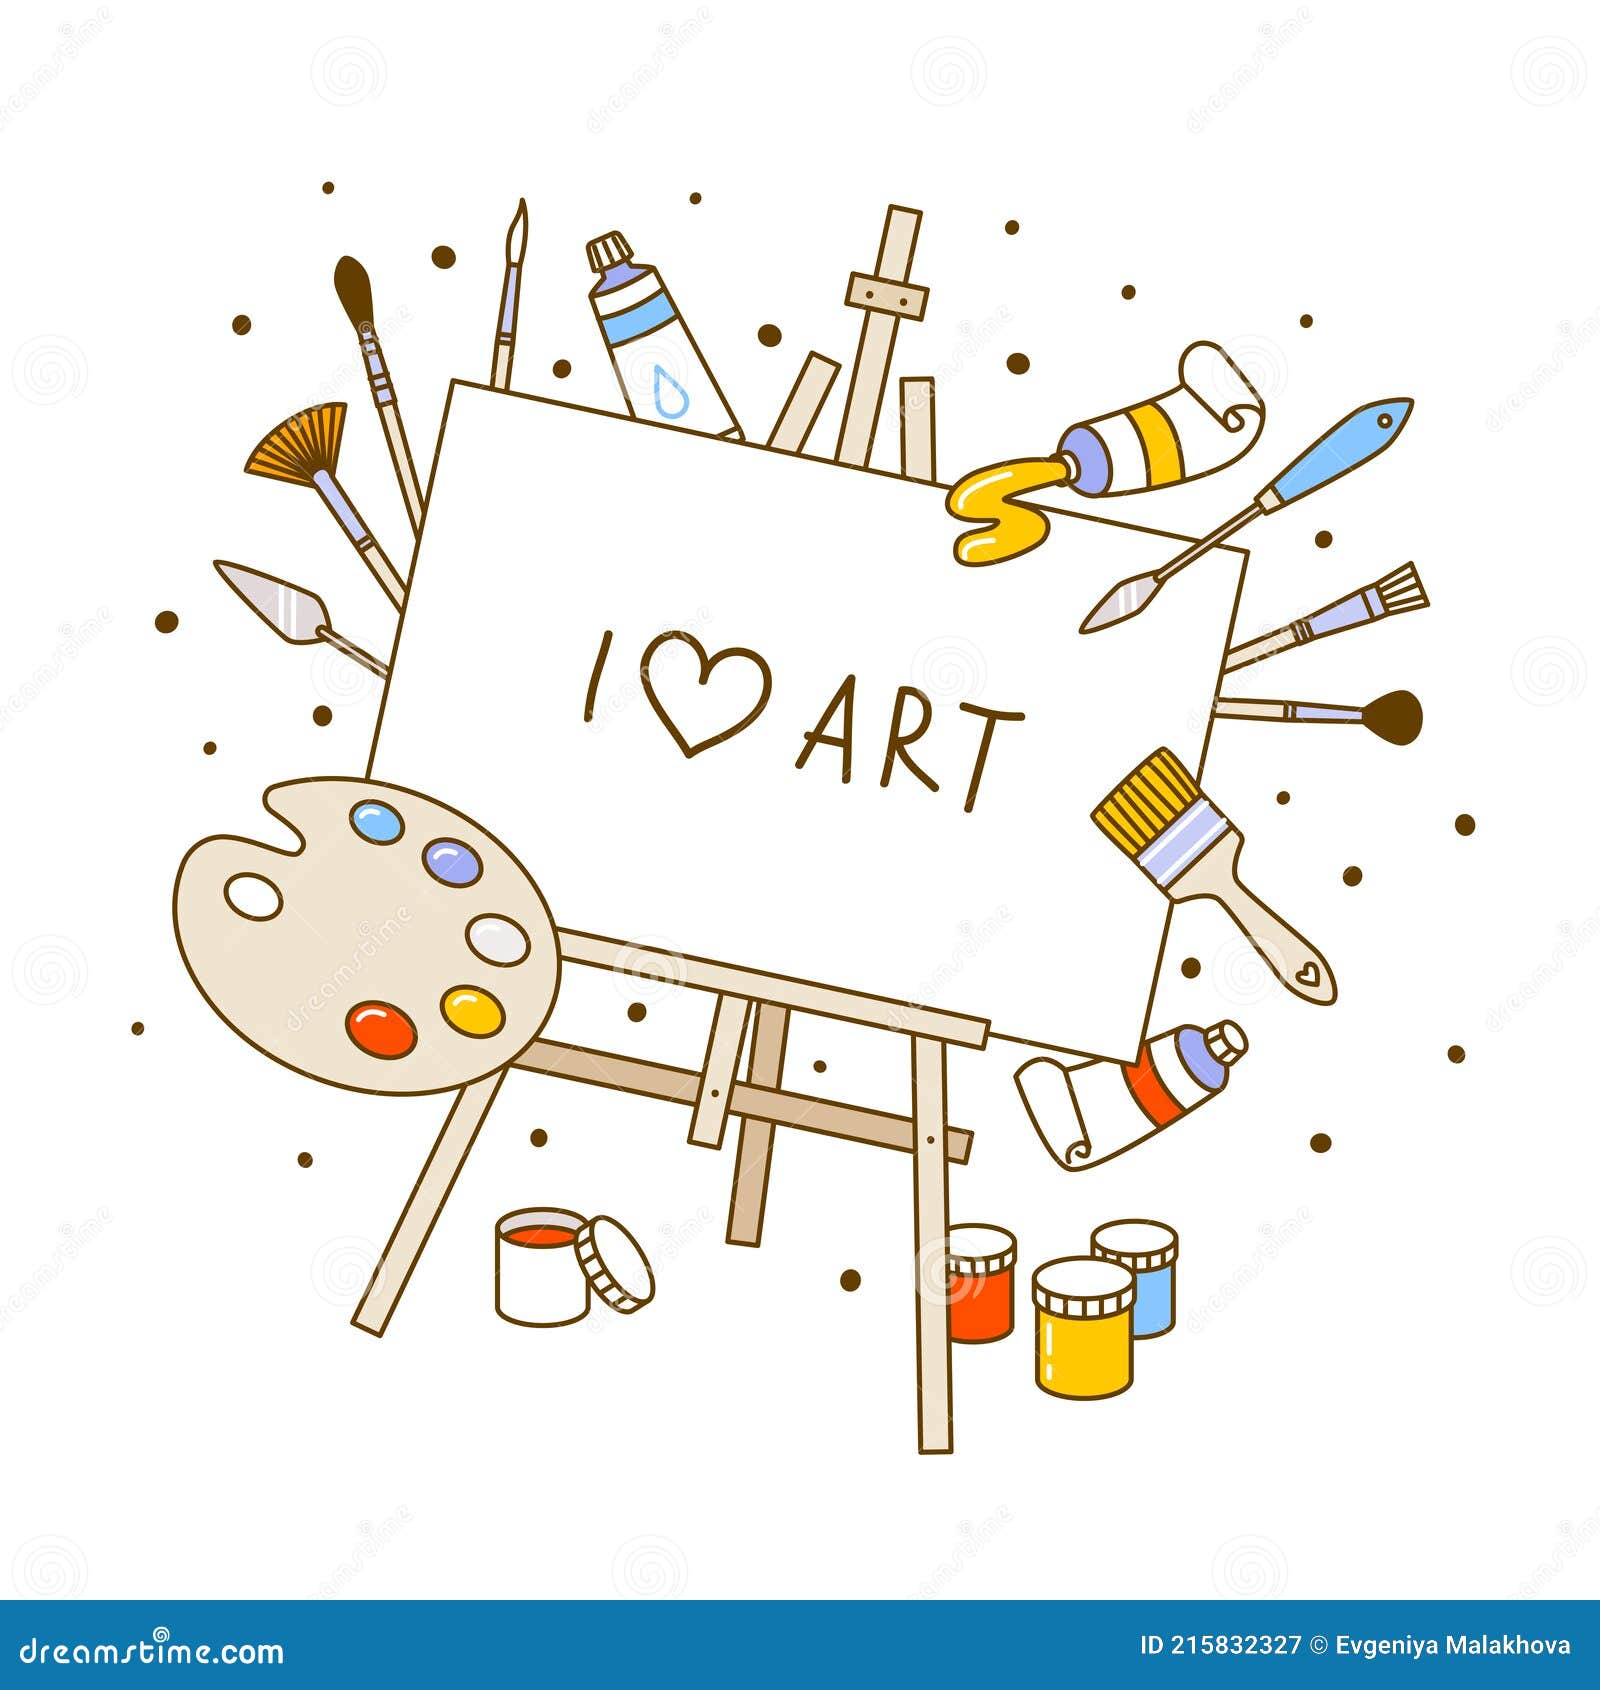 Drawing Tool Set Artist Easel Paints Brushes Cartoon Isolated White Stock  Vector by ©molnia26 242177968